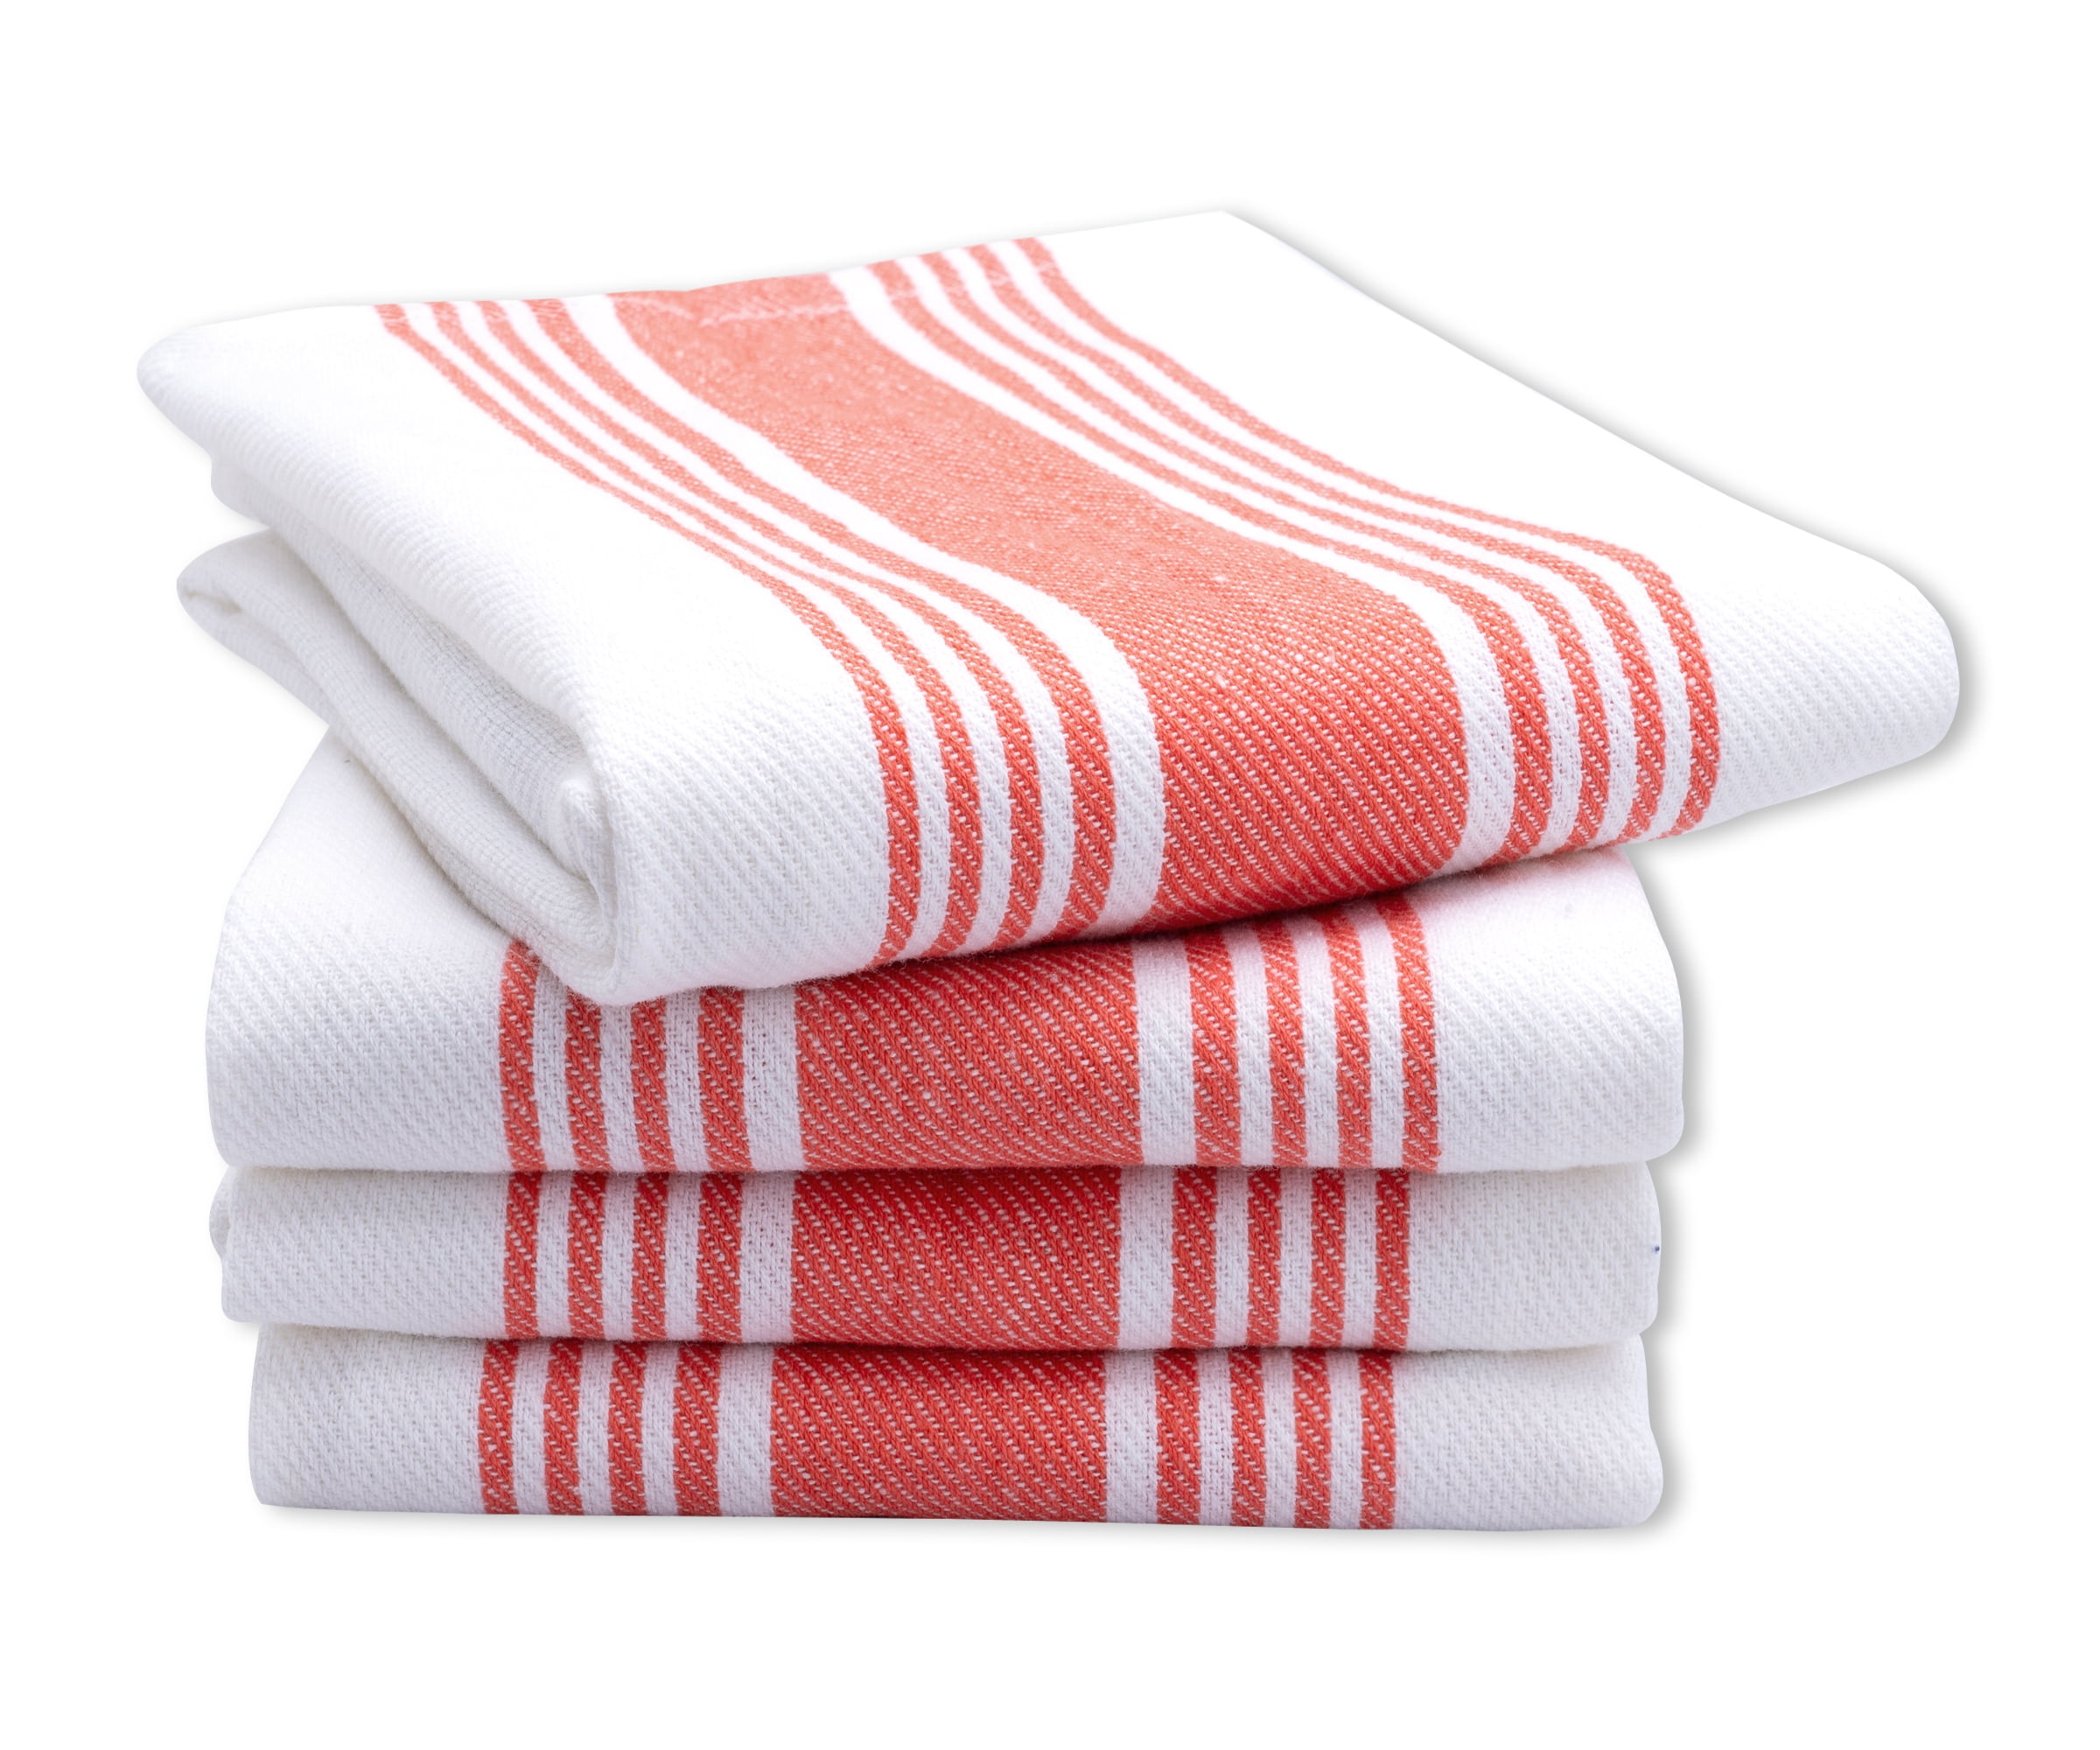 Now Designs Extra Large Red Wovern Cotton Kitchen Dish Towels, Set of 3 -  Fred Meyer